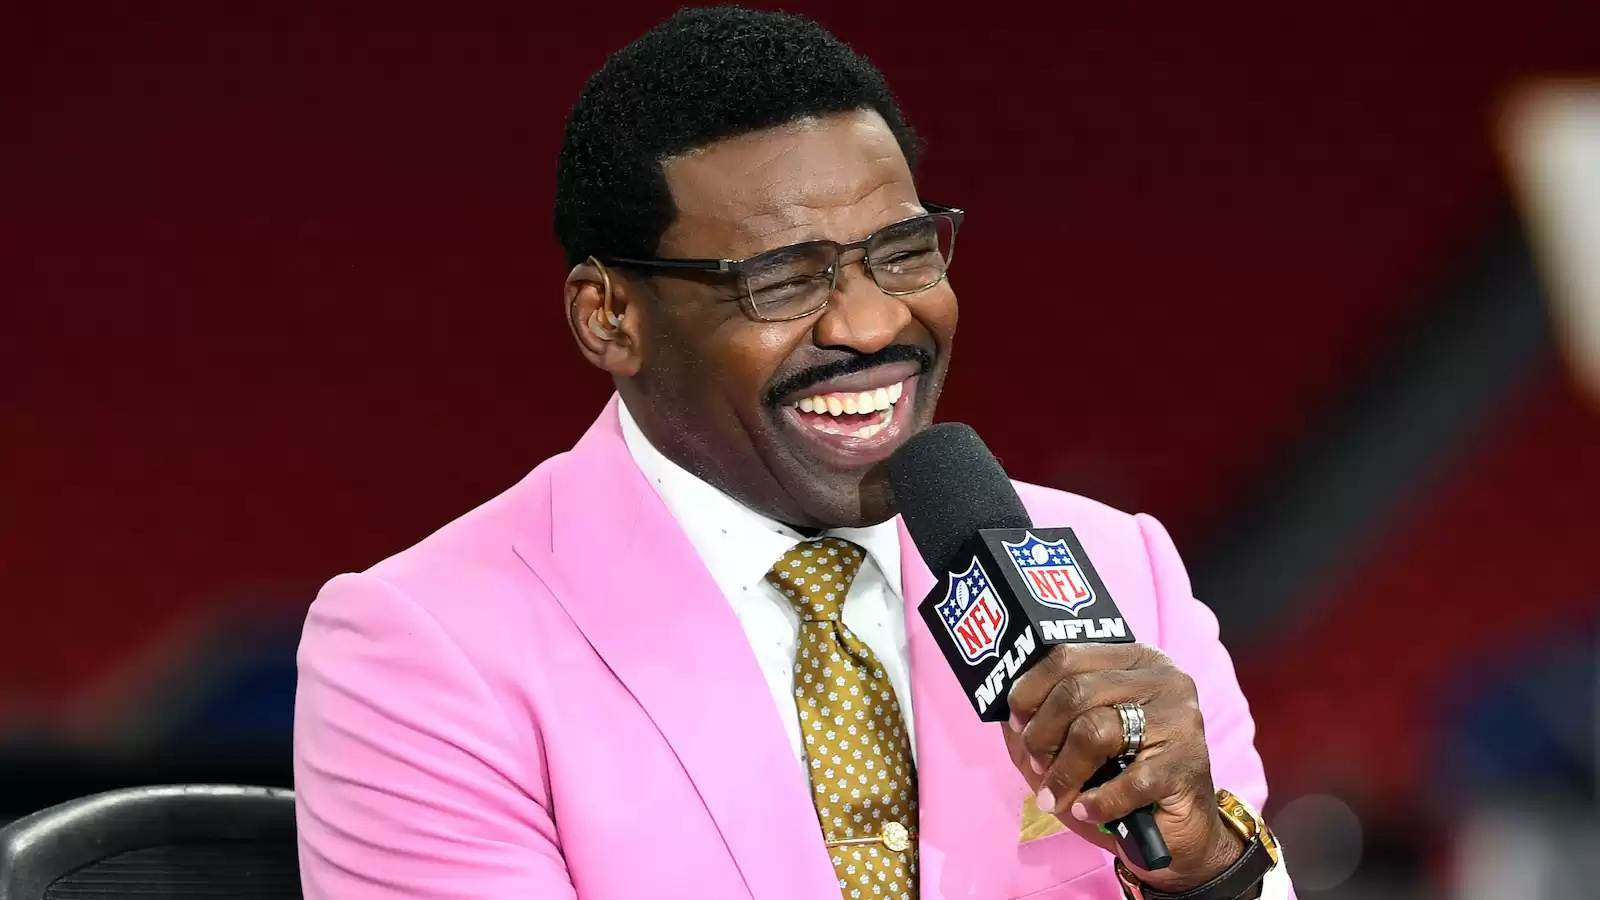 Michael Irvin returns to NFL Network following settlement with Marriott